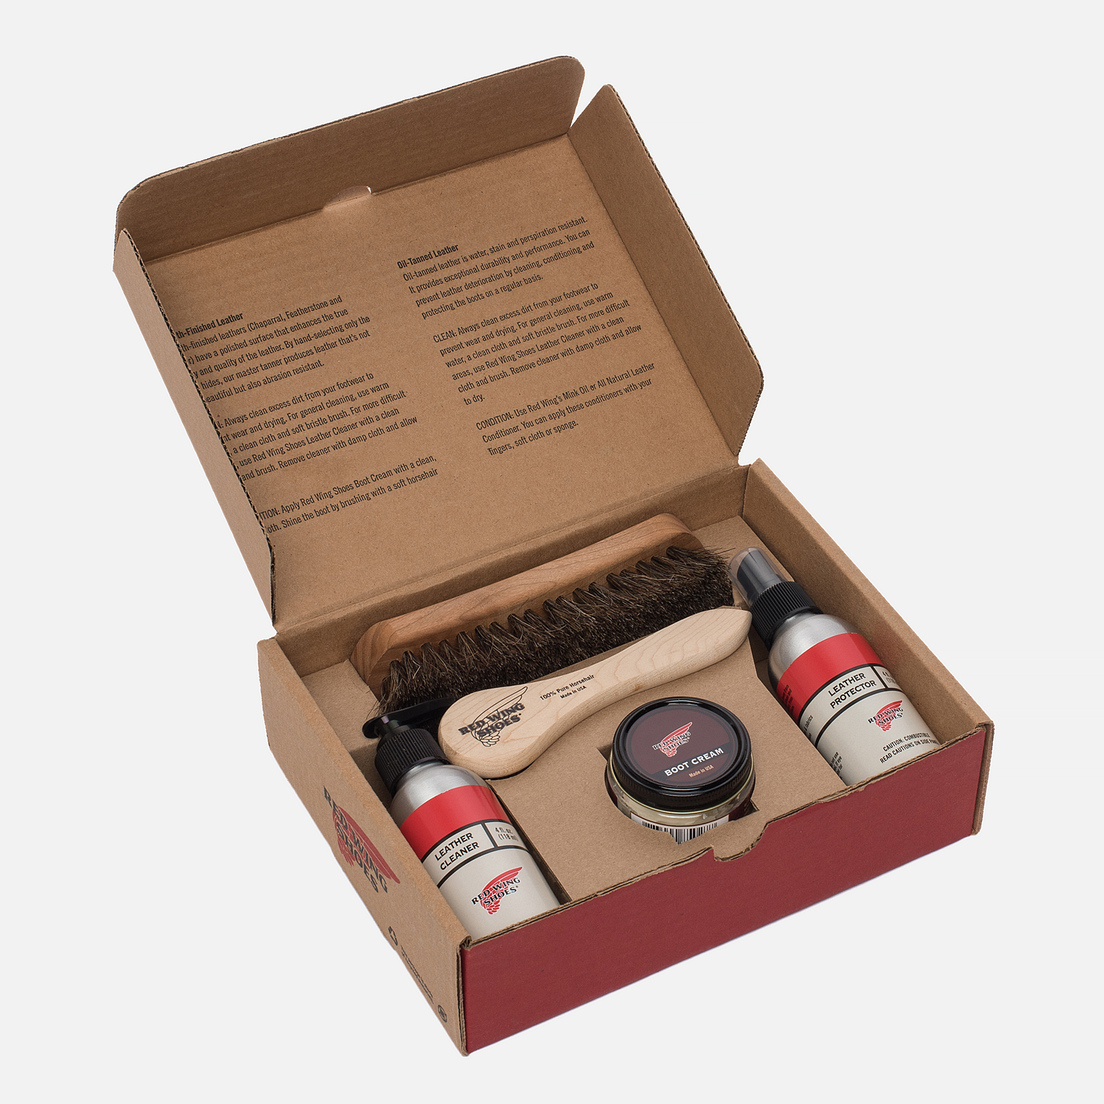 Red Wing Shoes Набор для ухода за обувью Smooth Finish Leather Care Product Kit